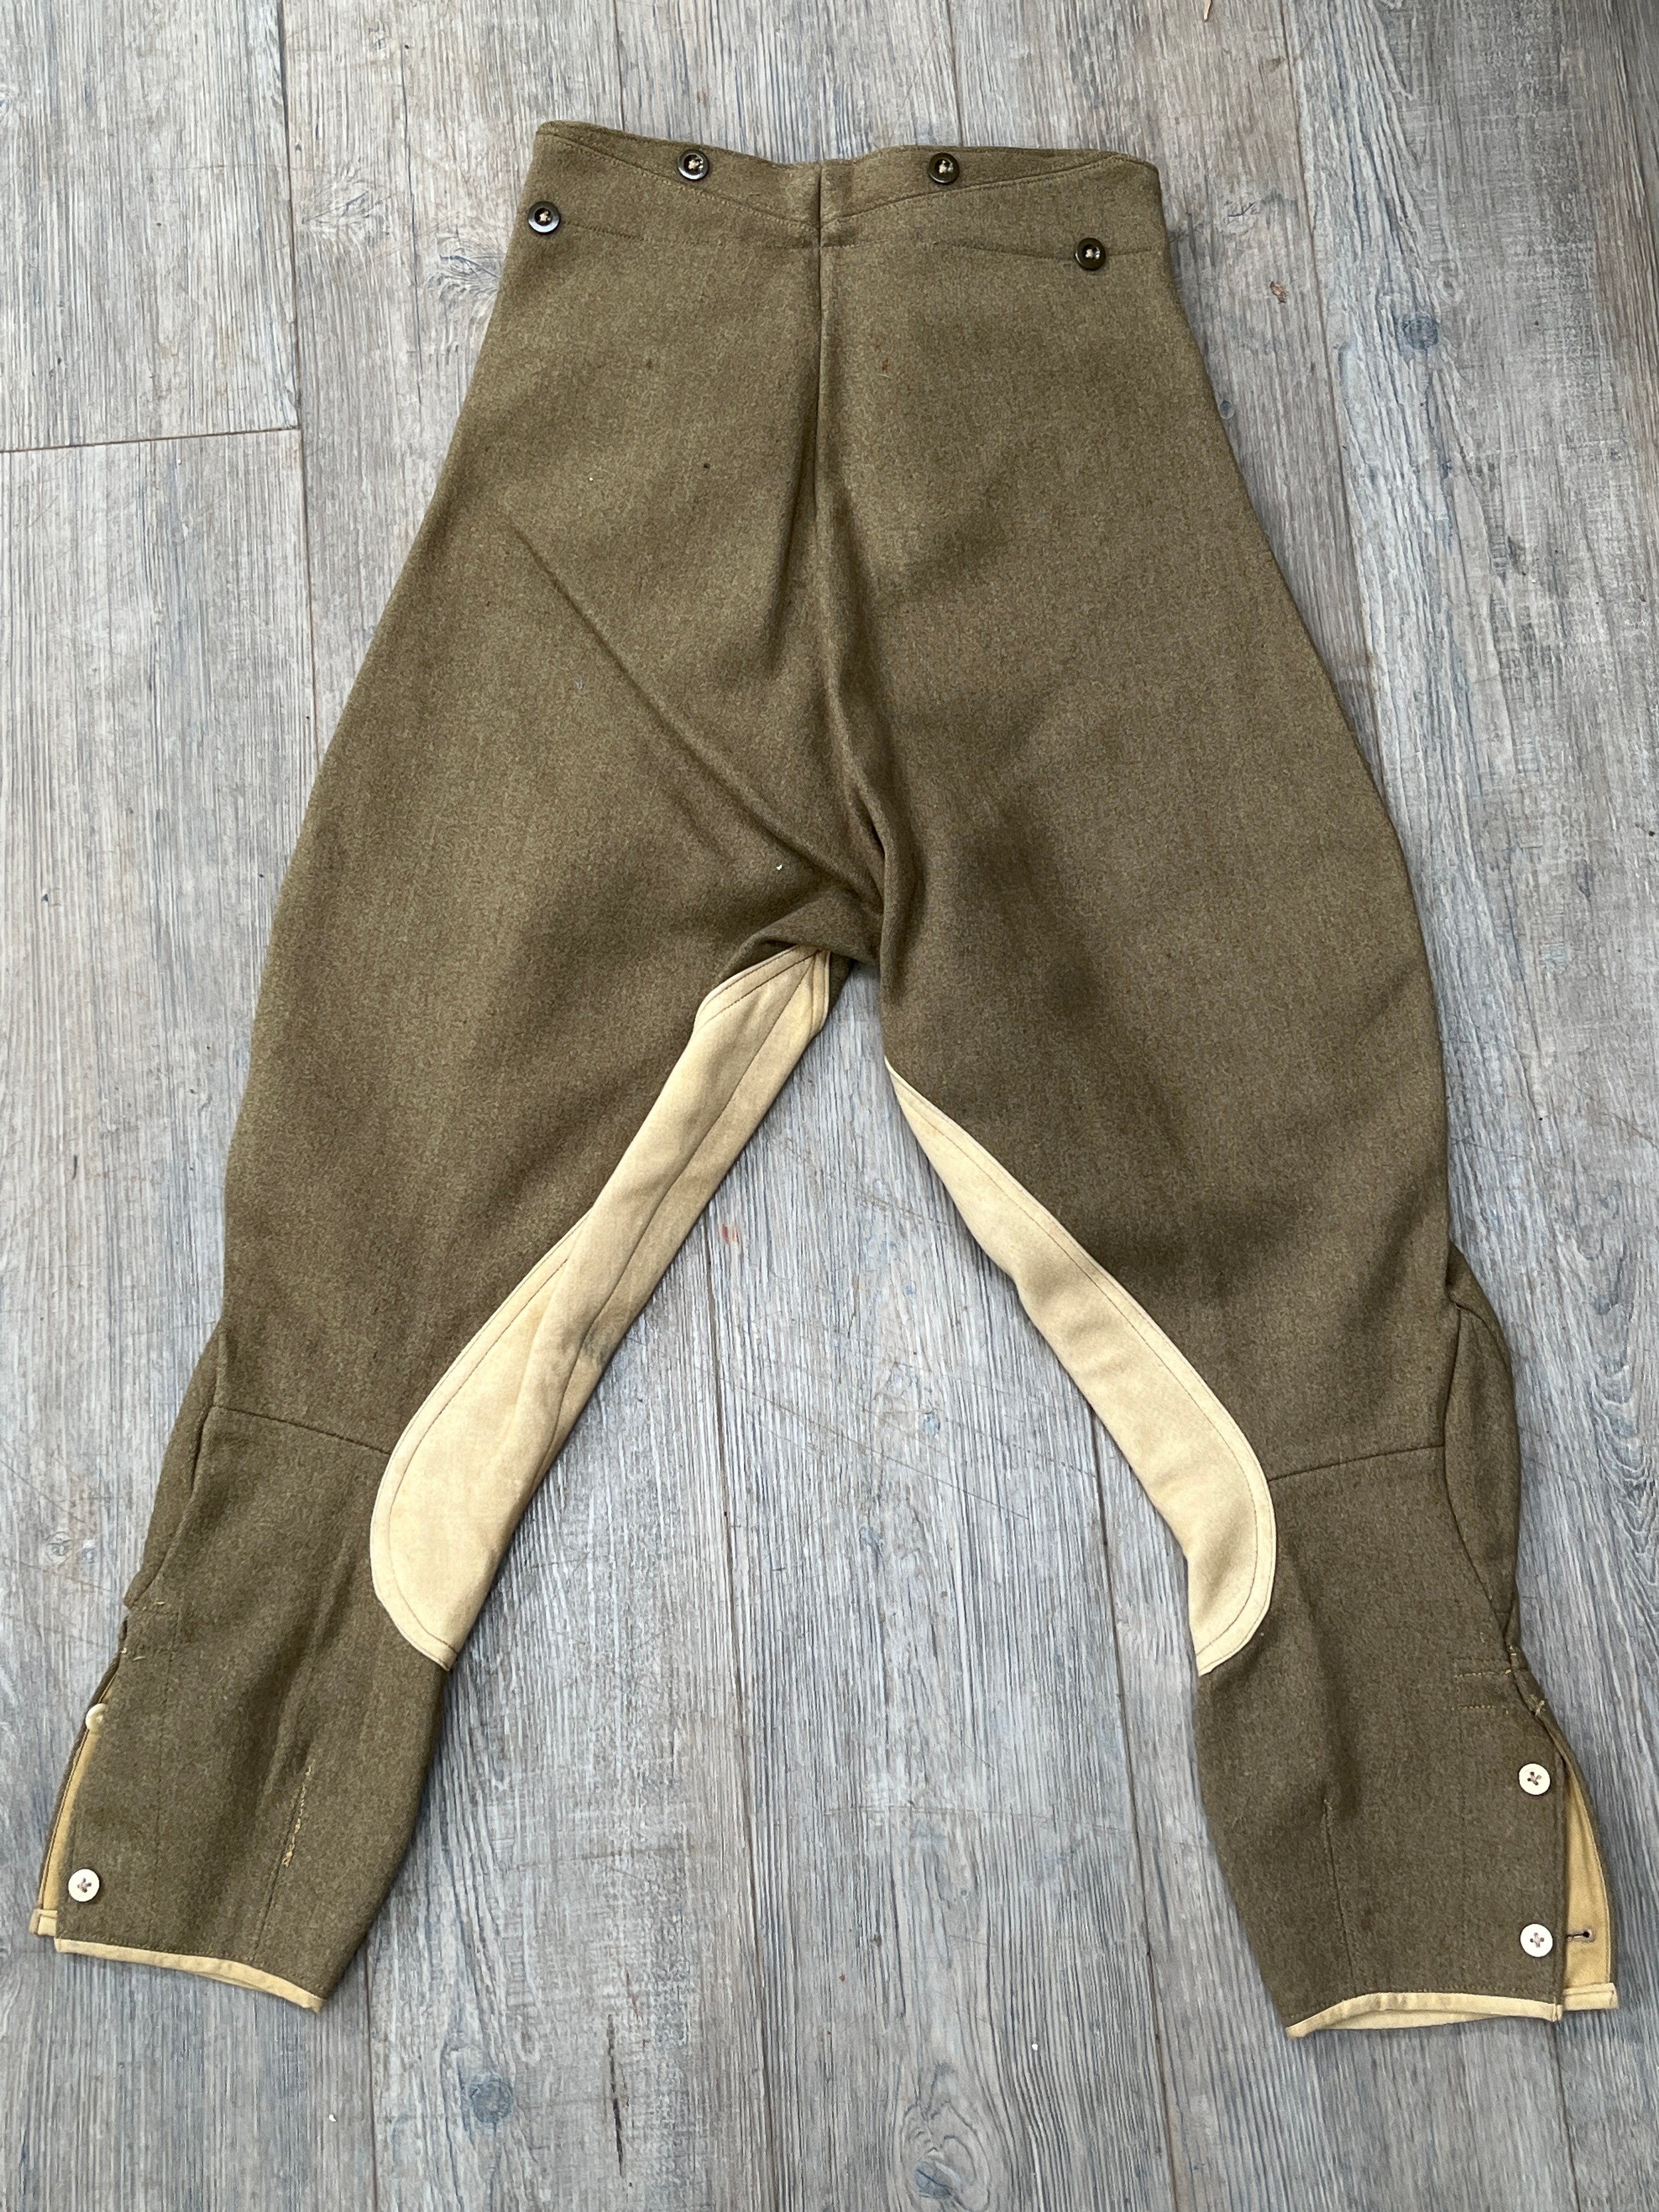 A pair of WWII British Service Dress Pantaloons for Motor Cyclists, size no. 13 with date June 1945 - Image 2 of 3